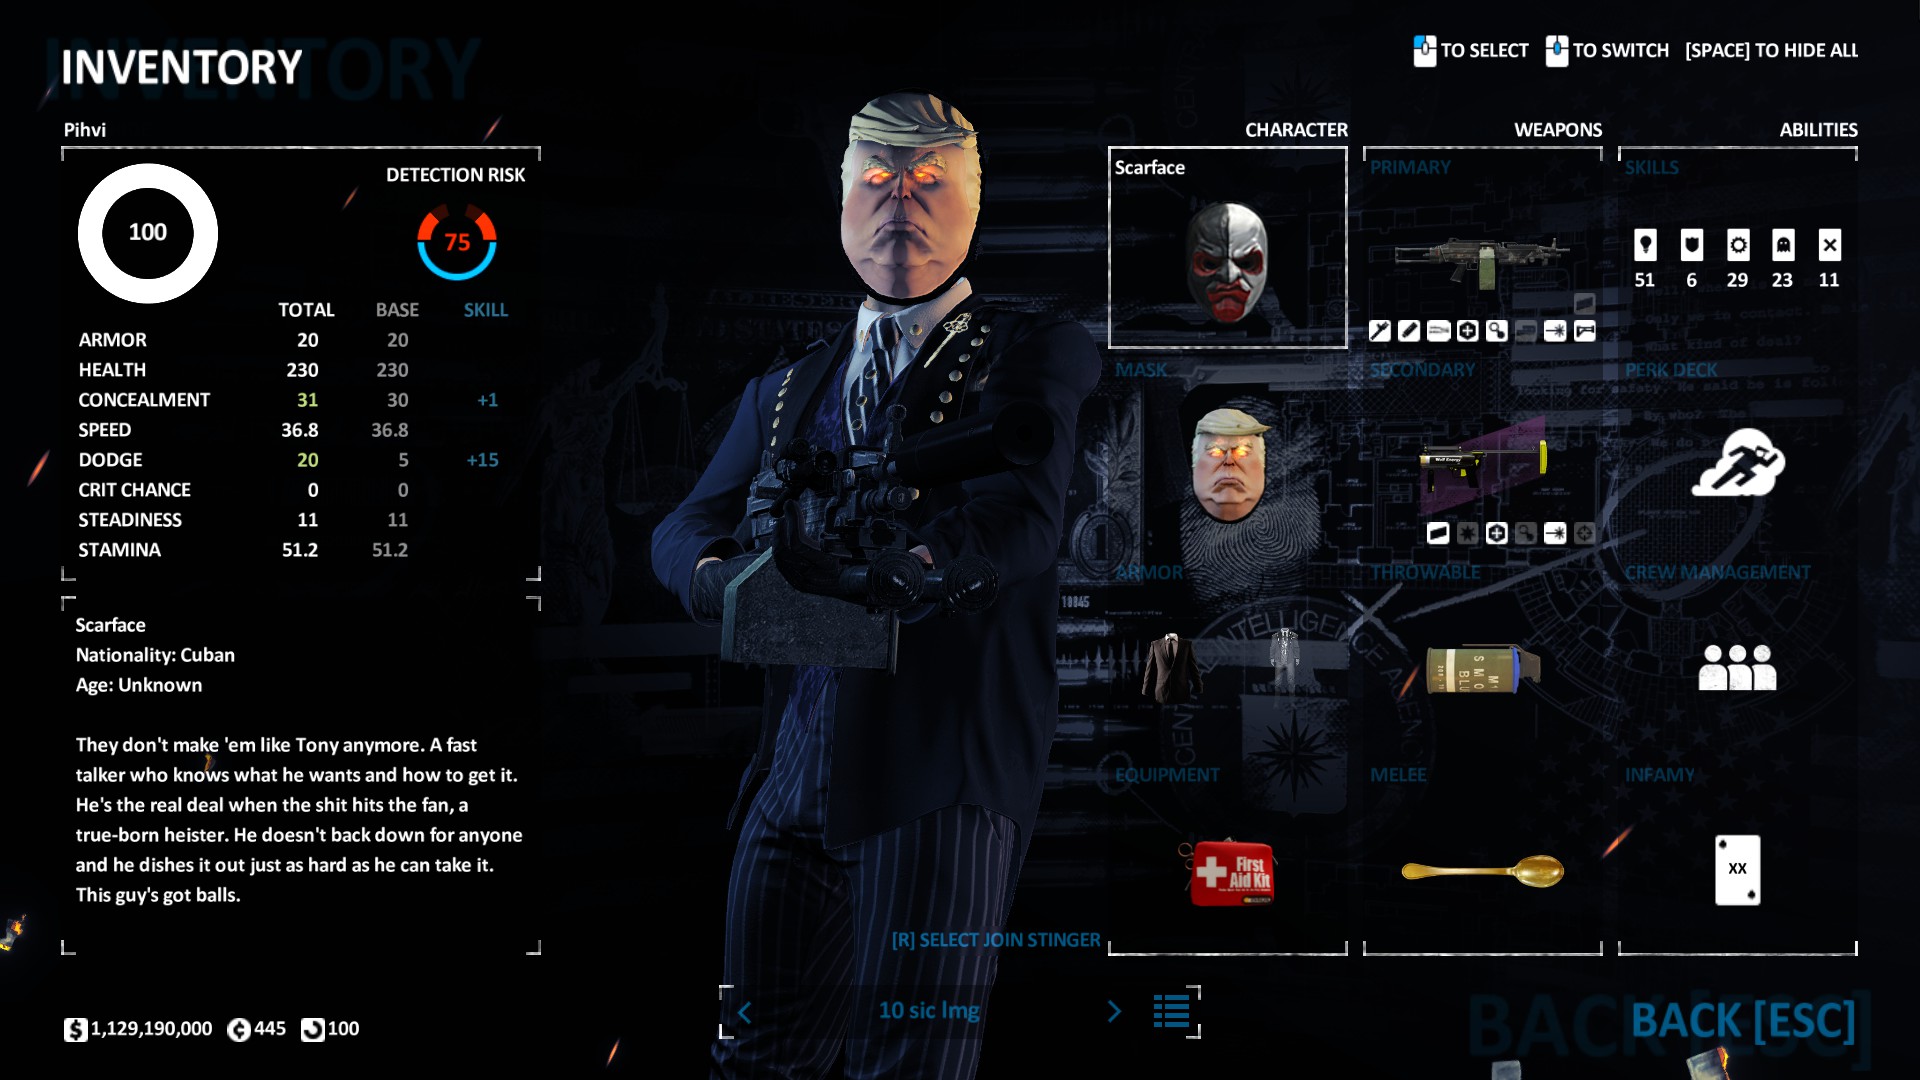 PAYDAY 2 Best Build for Sicario - Weapon Attachments - Sicario Lmg + Spoon - 7C16612